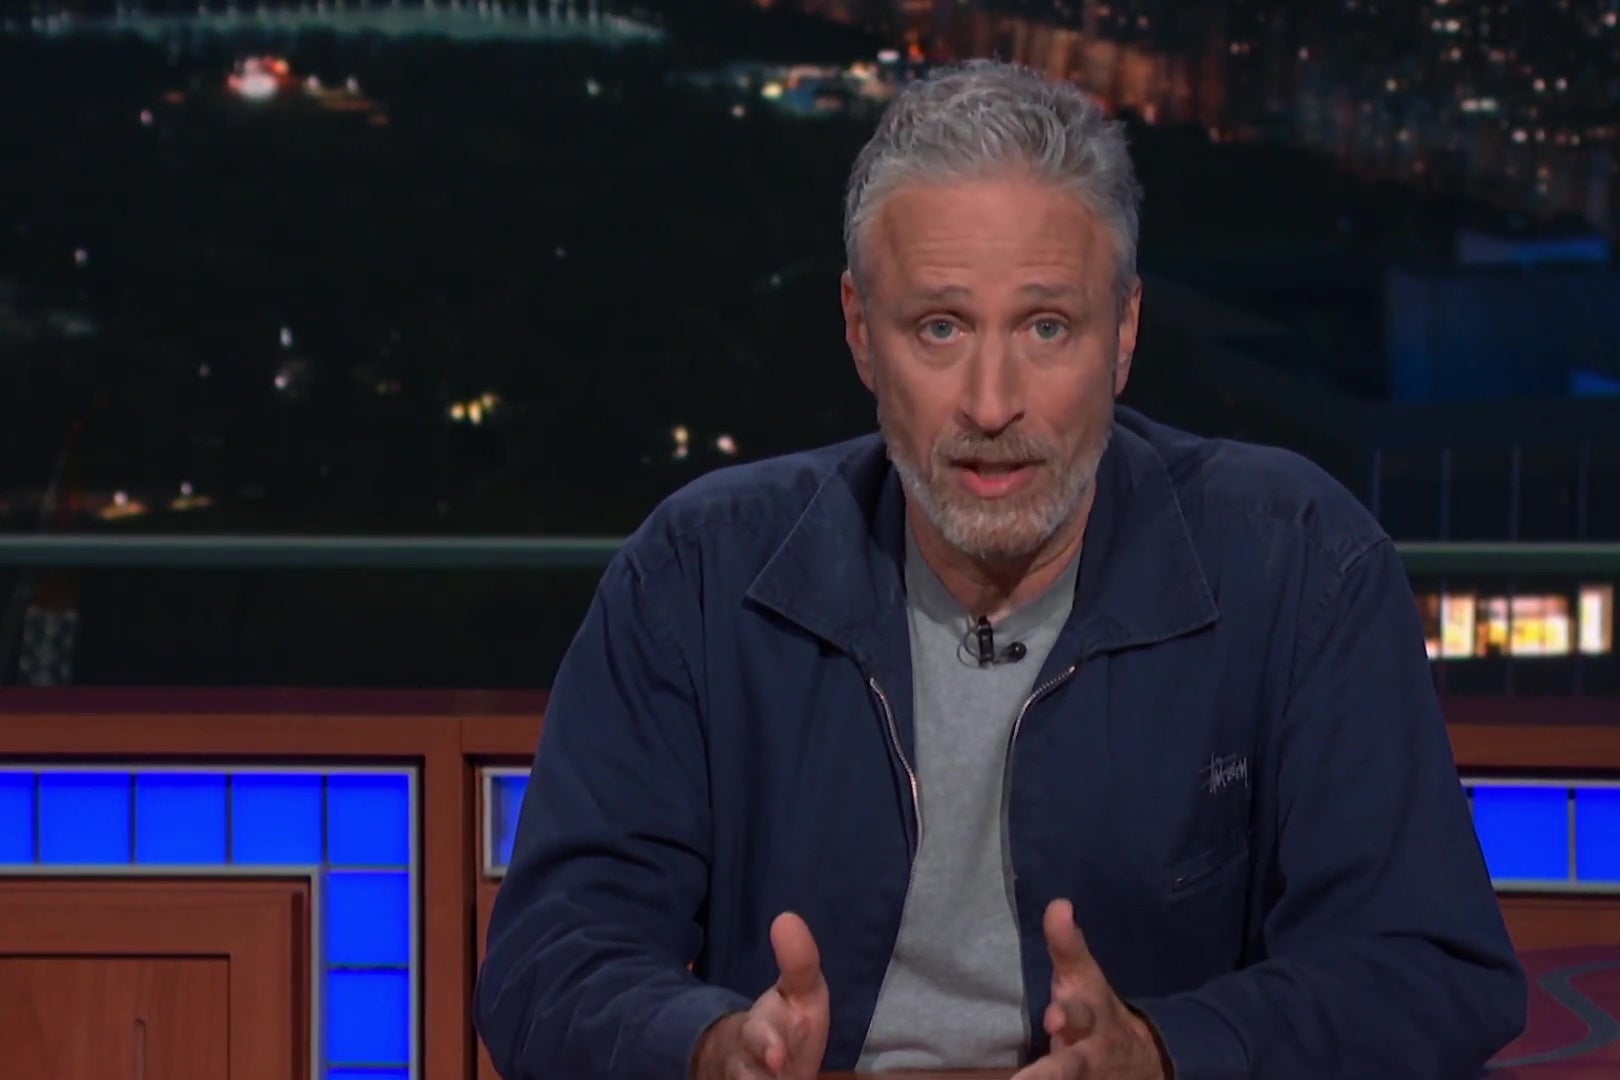 John Stewart on the Late Show with Stephen Colbert.